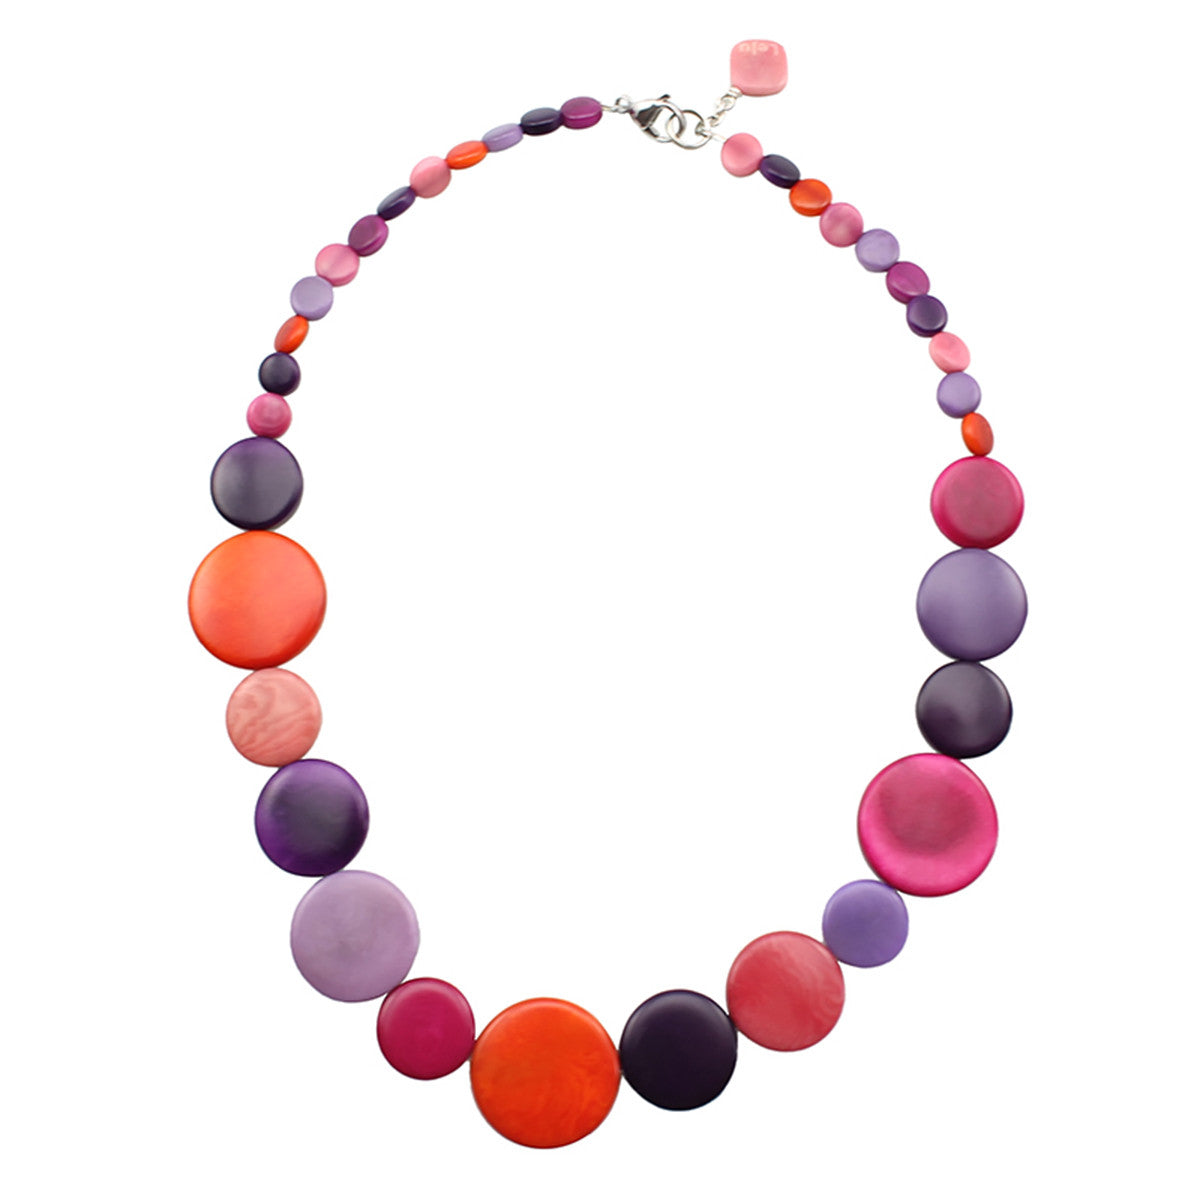 VEGETABLE IVORY NECKLACE IN PINK TONES